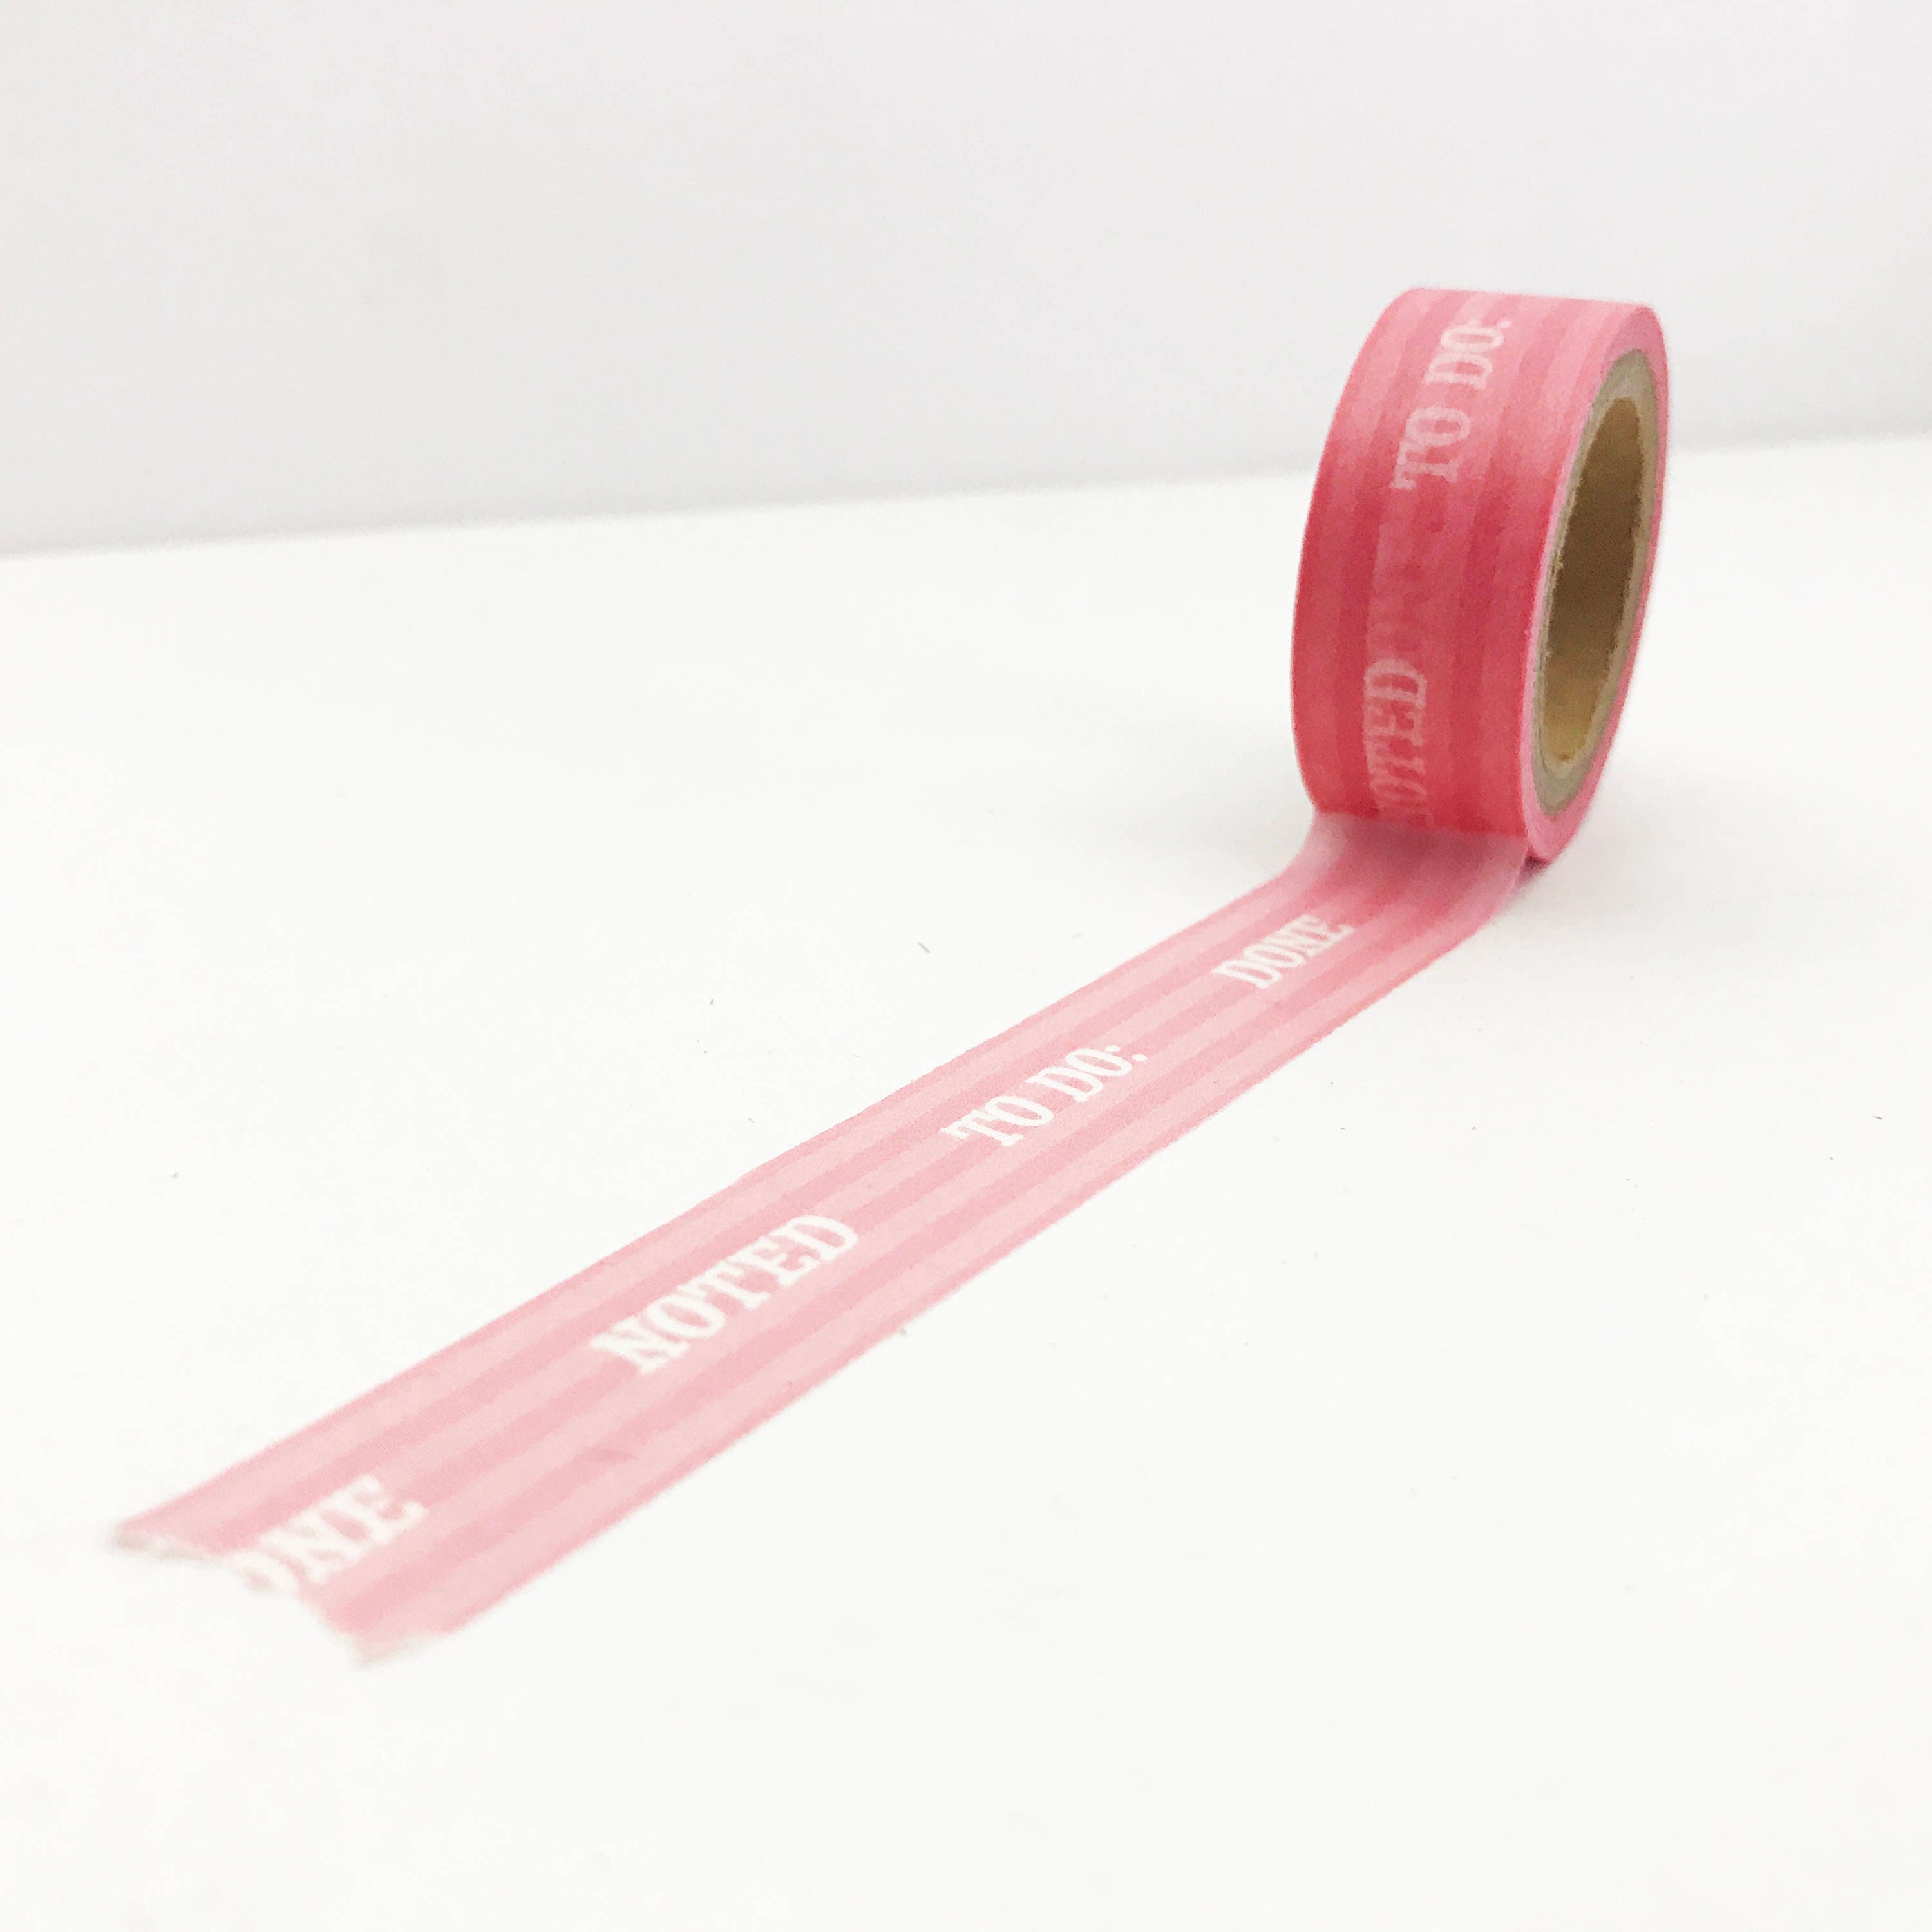 To Do Done Noted Words Washi Tape Pink Craft Tape Words - Etsy